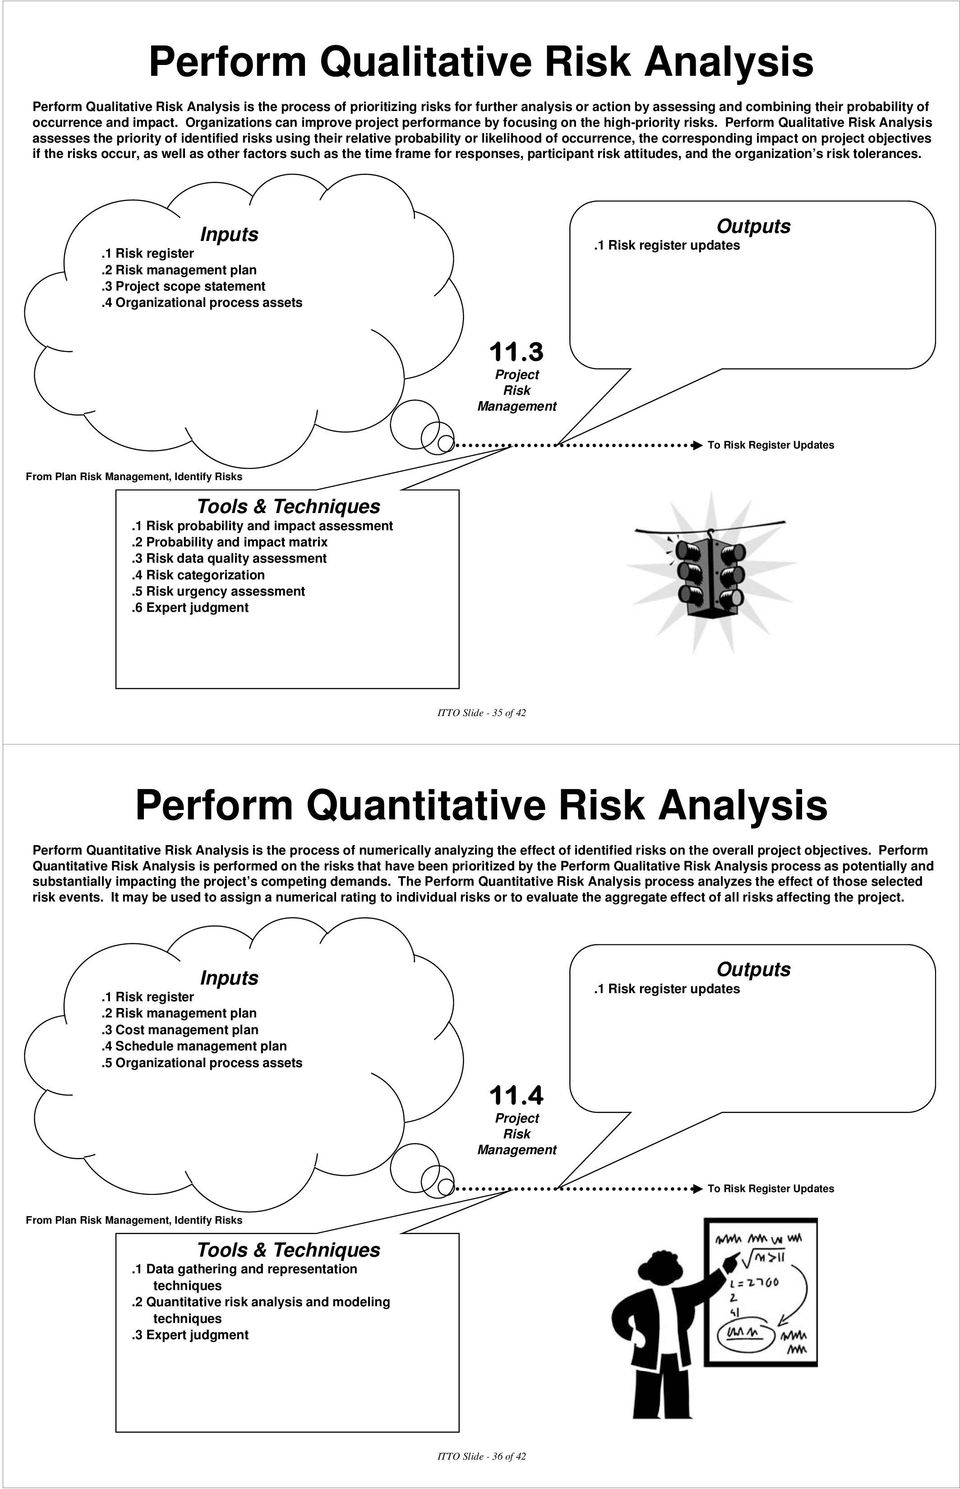 Perform Qualitative Risk Analysis assesses the priority of identified risks using their relative probability or likelihood of occurrence, the corresponding impact on project objectives if the risks